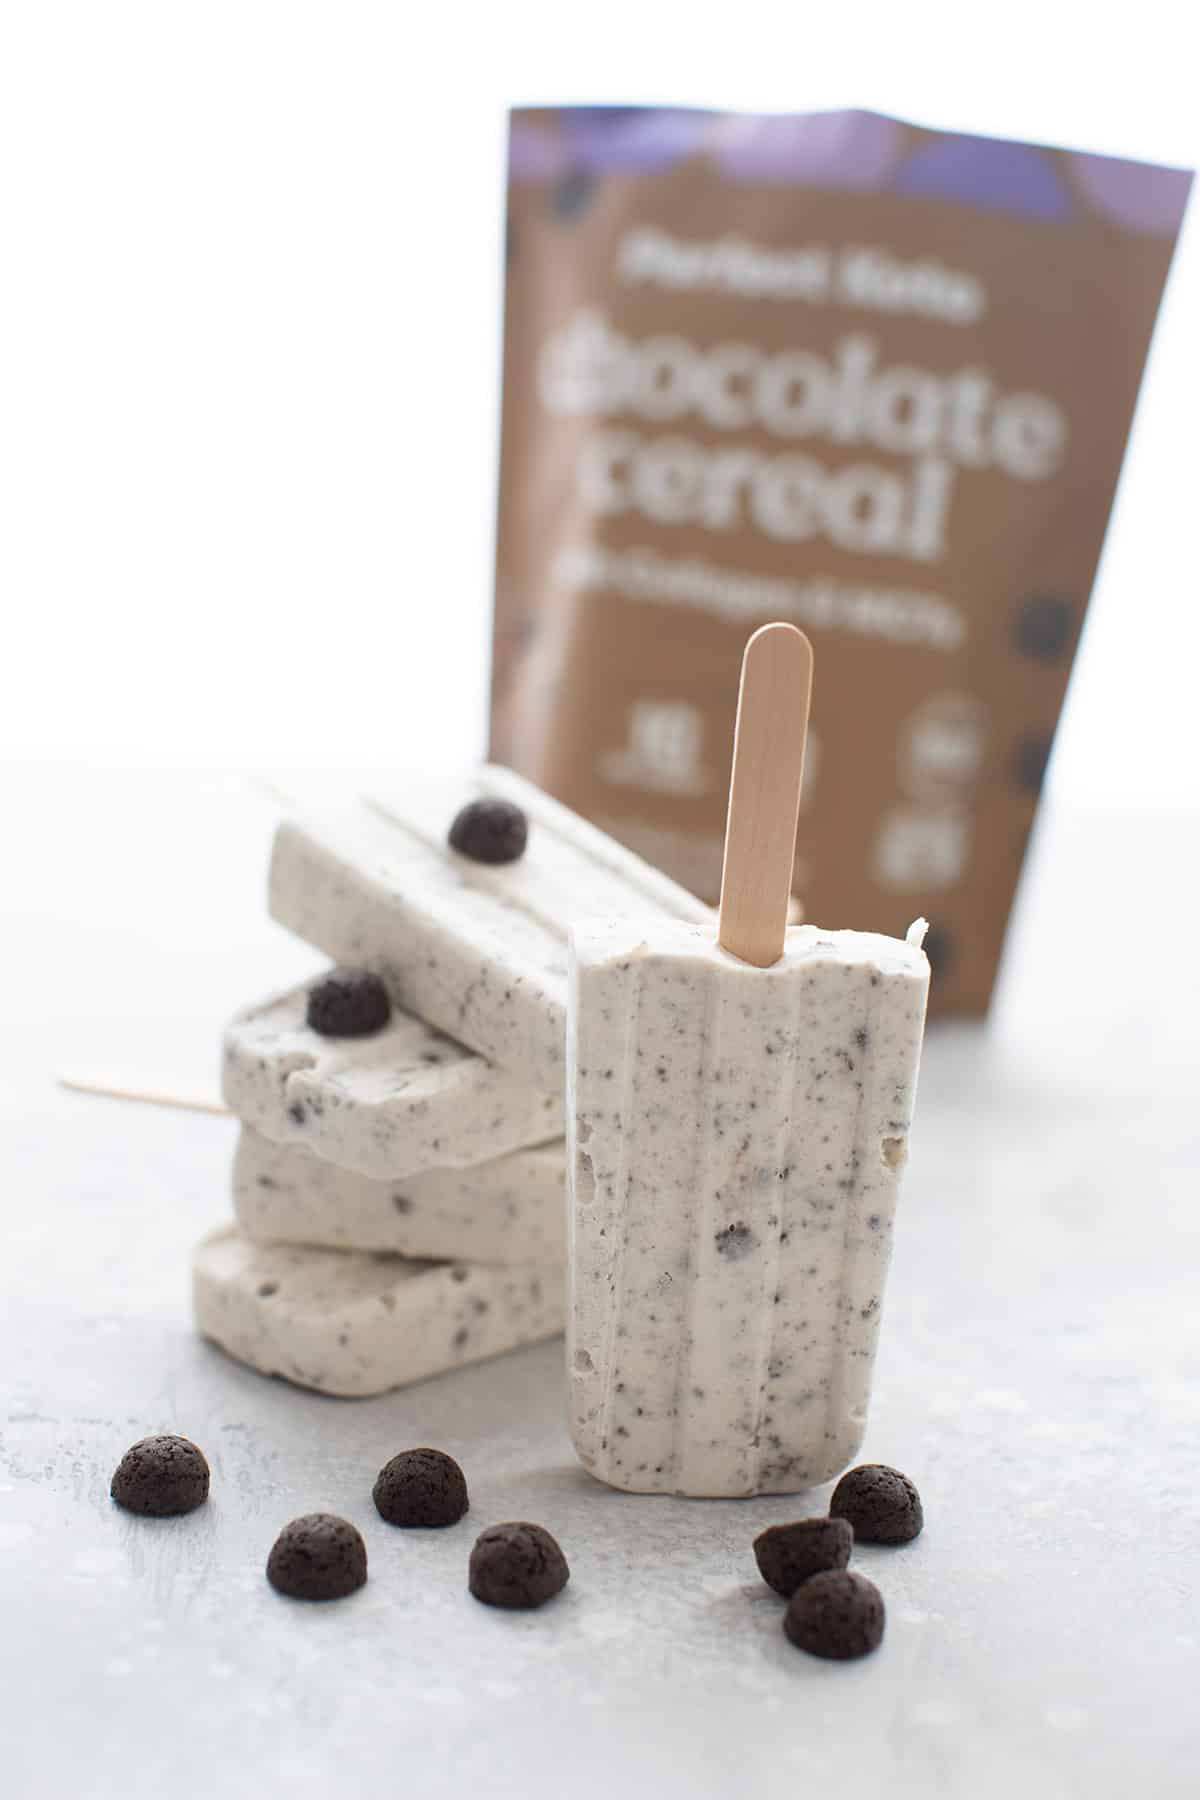 Keto Cookies and Cream Popsicles with a bag of chocolate keto cereal in the background.